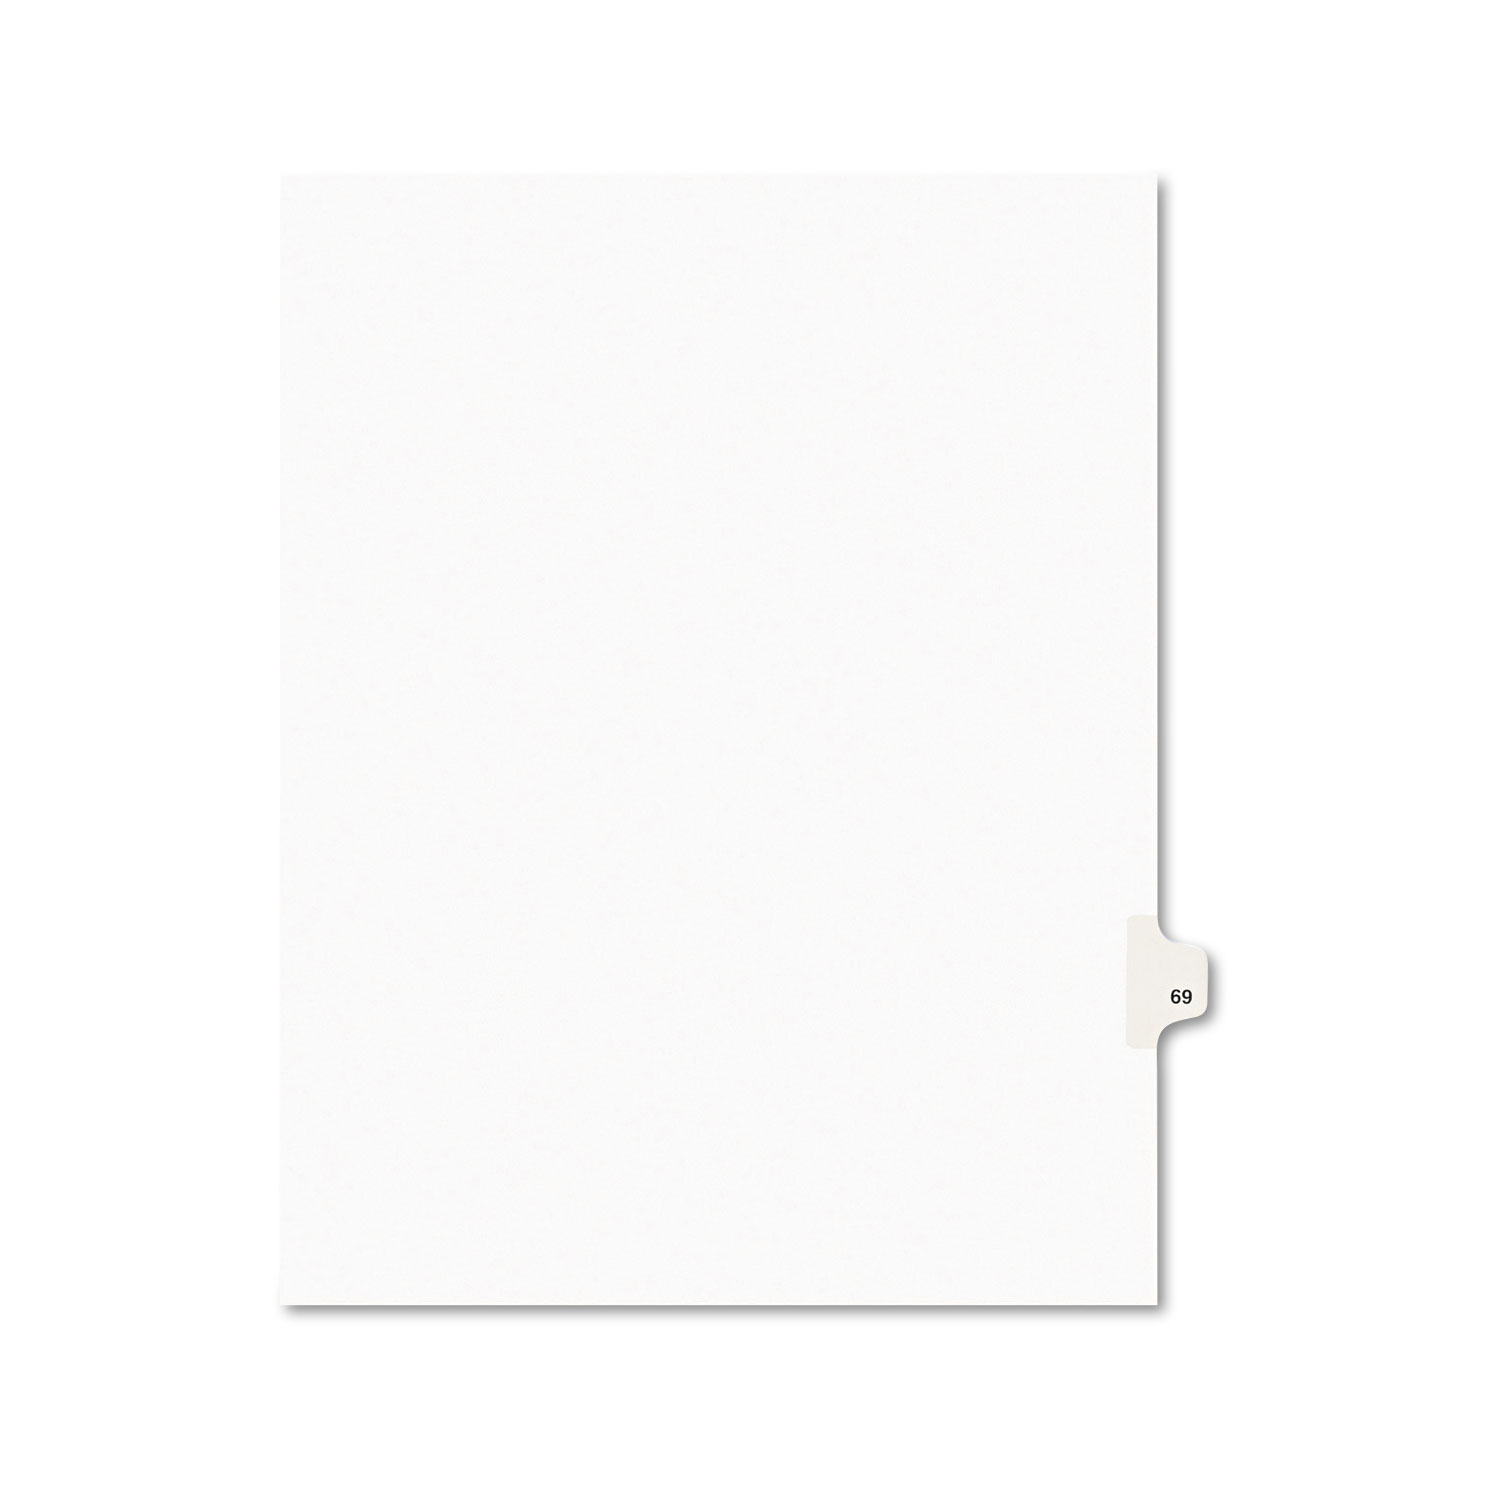  Avery 01069 Preprinted Legal Exhibit Side Tab Index Dividers, Avery Style, 10-Tab, 69, 11 x 8.5, White, 25/Pack (AVE01069) 